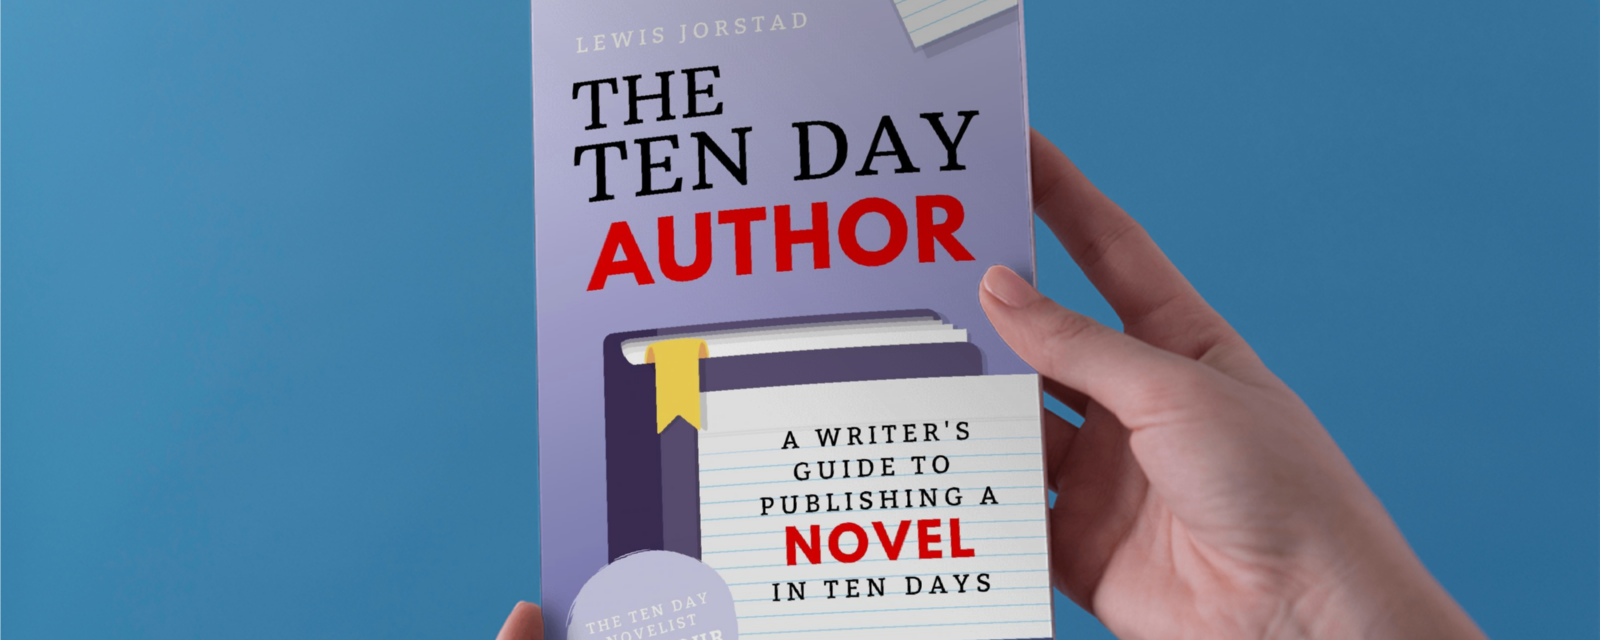 How to Self-Publish a Novel in 10 Days